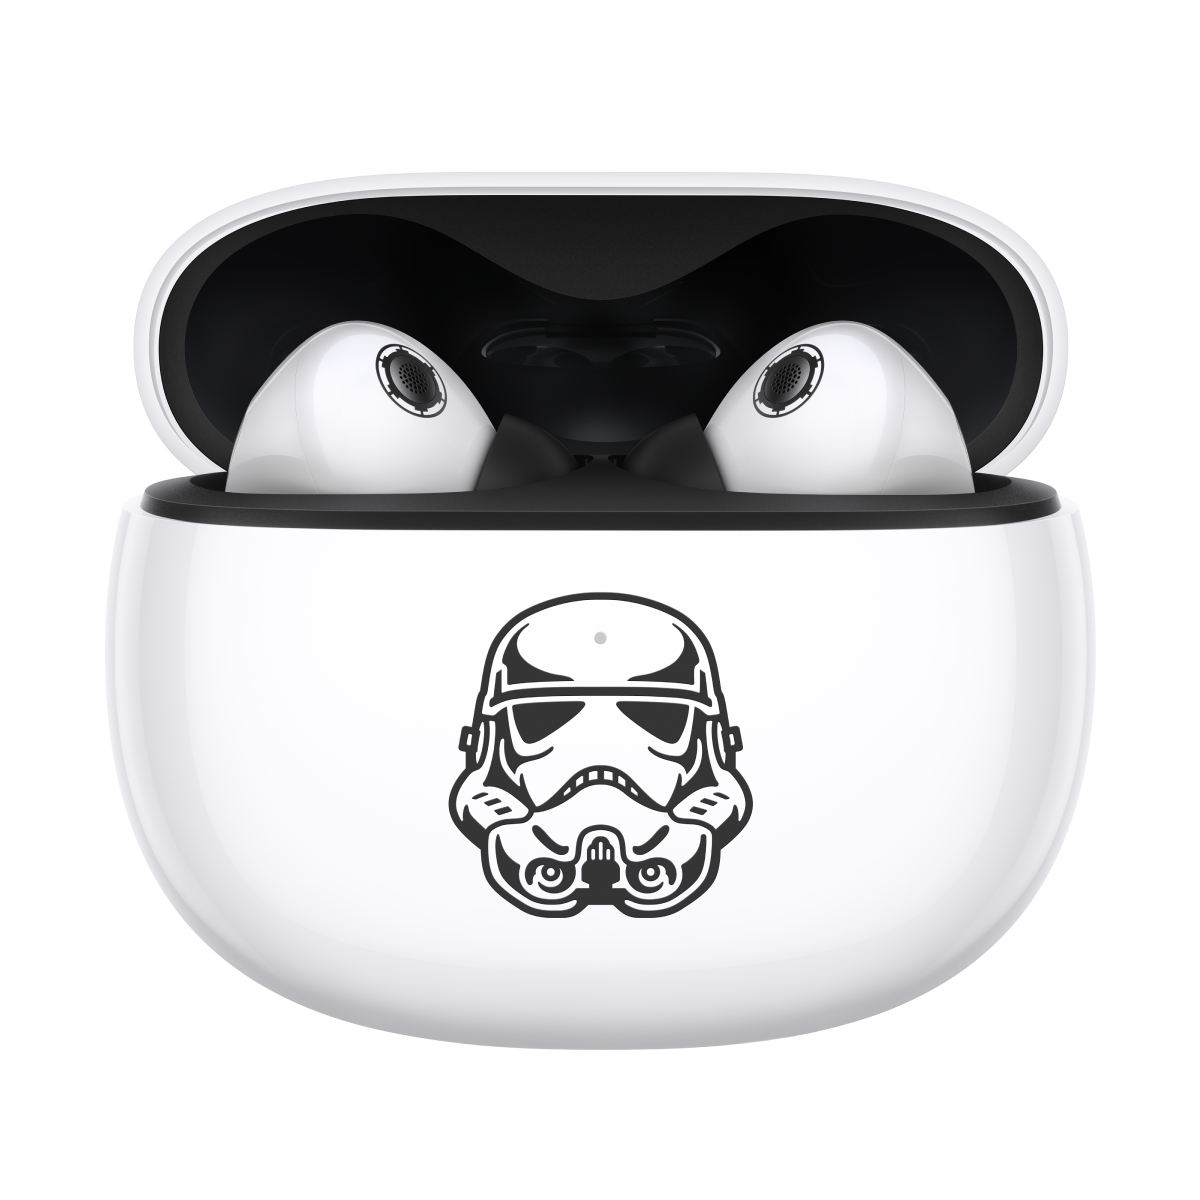 Xiaomi Buds 3 Star Wars Edition (Stormtrooper), , large image number 0